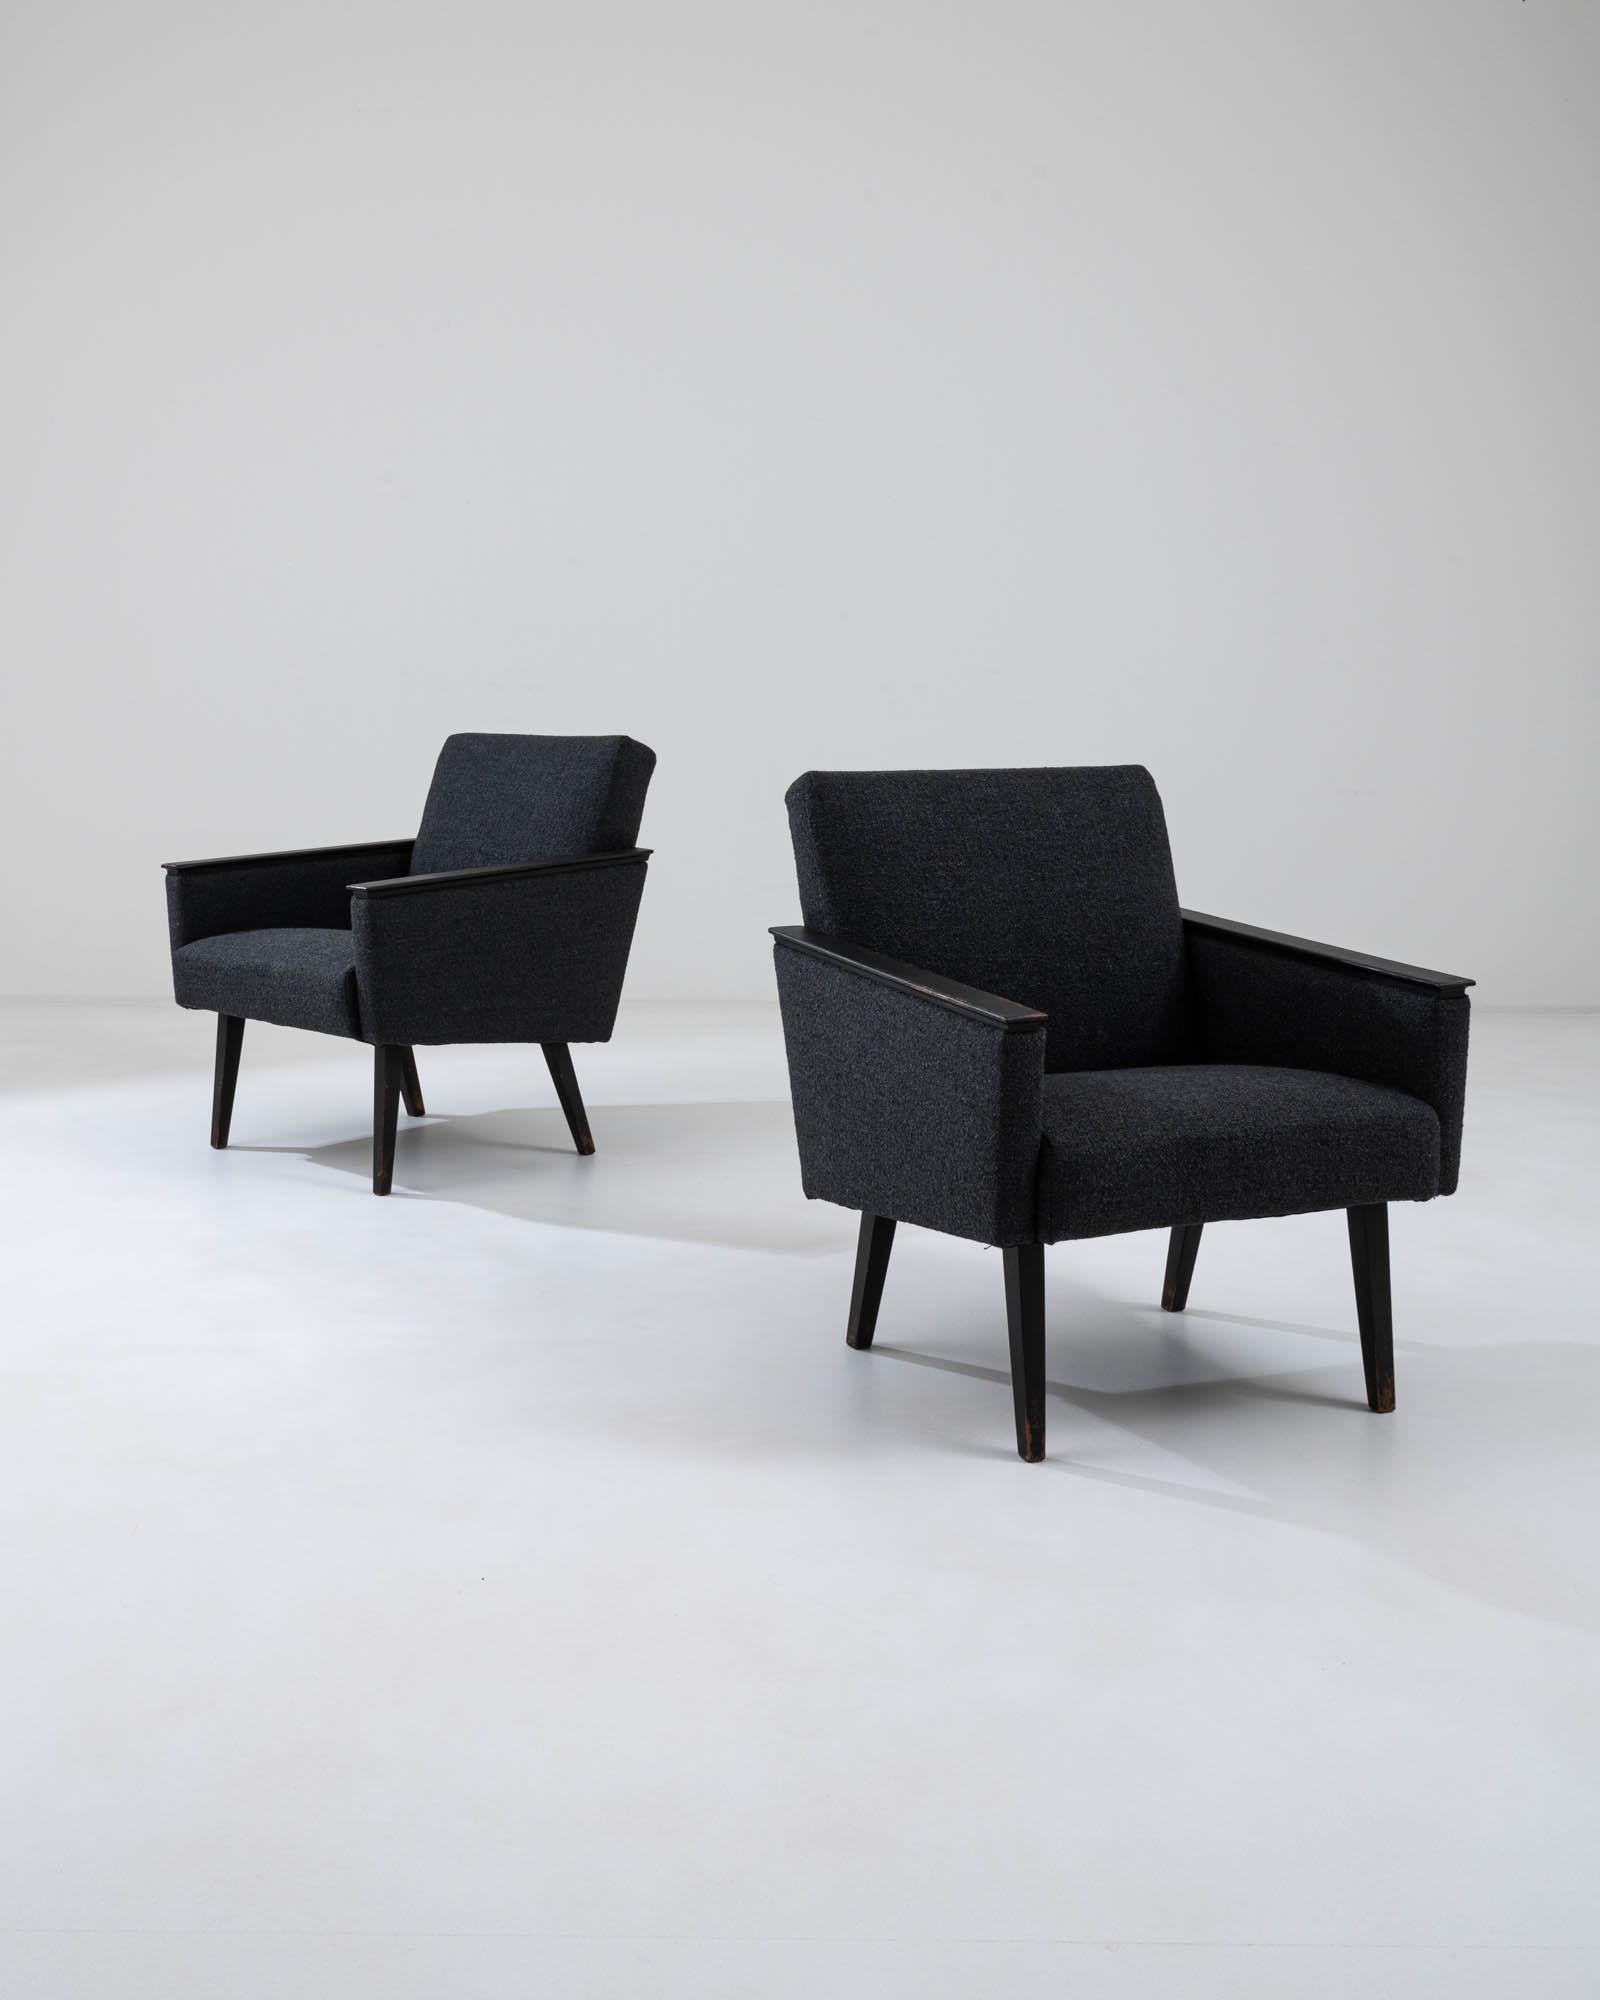 A pair of upholstered wooden armchairs from France, produced circa 1960. A smart set in a deep black, featuring black patinated wooden armrests and legs. Chic slants create a sloping seat back and trapezoidal side panels in this conversational pair.